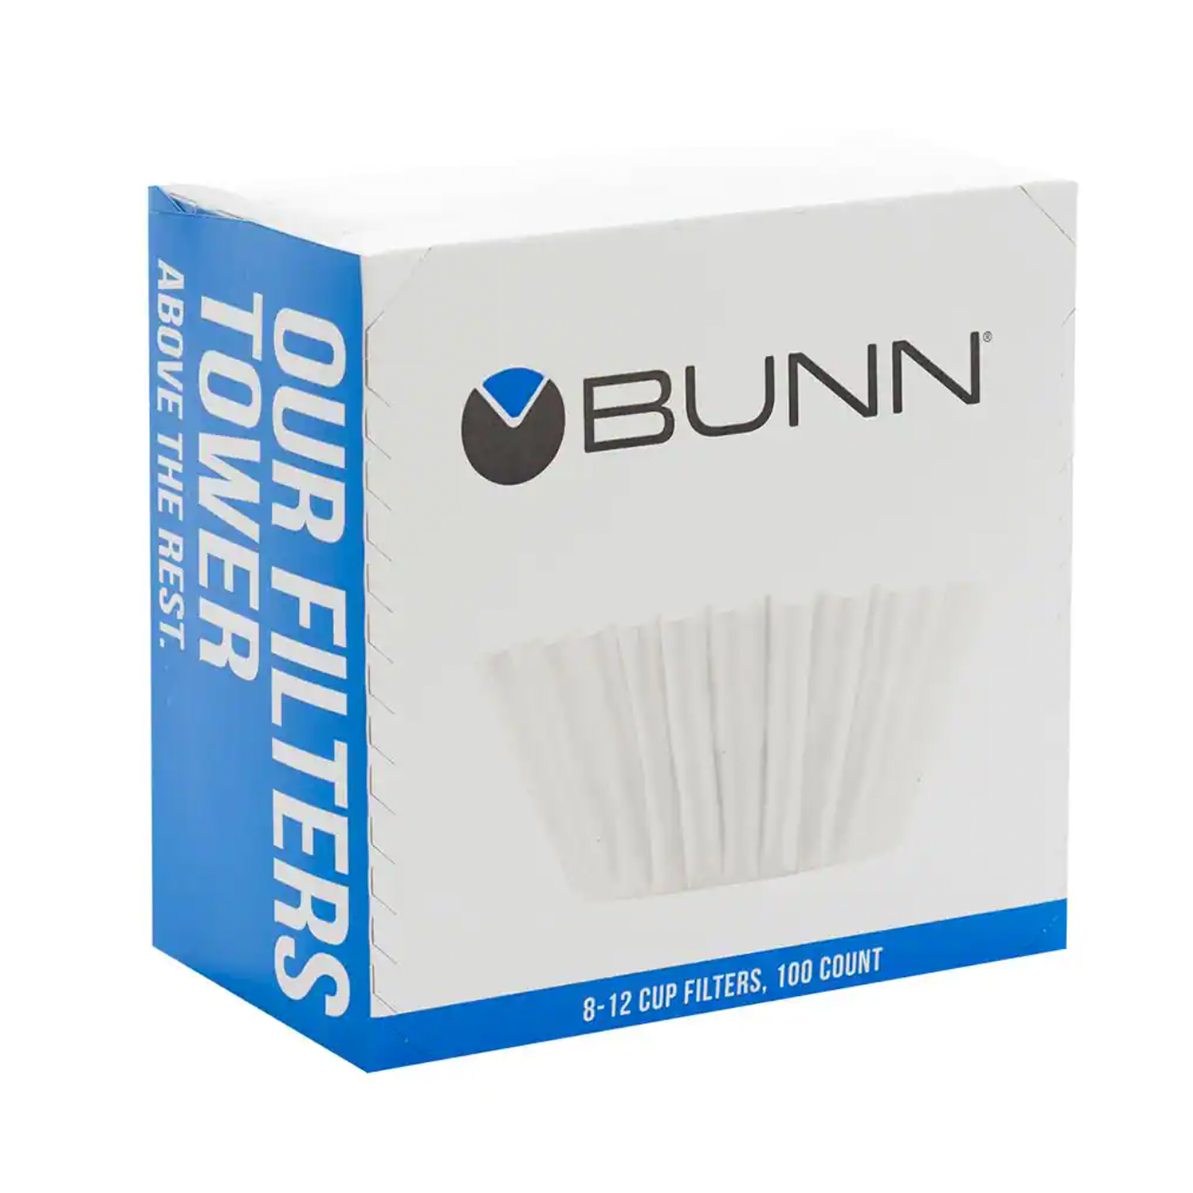 https://cdn.shopify.com/s/files/1/0550/4119/6267/products/BunnFlatBottomFilters_1445x.png?v=1652212071